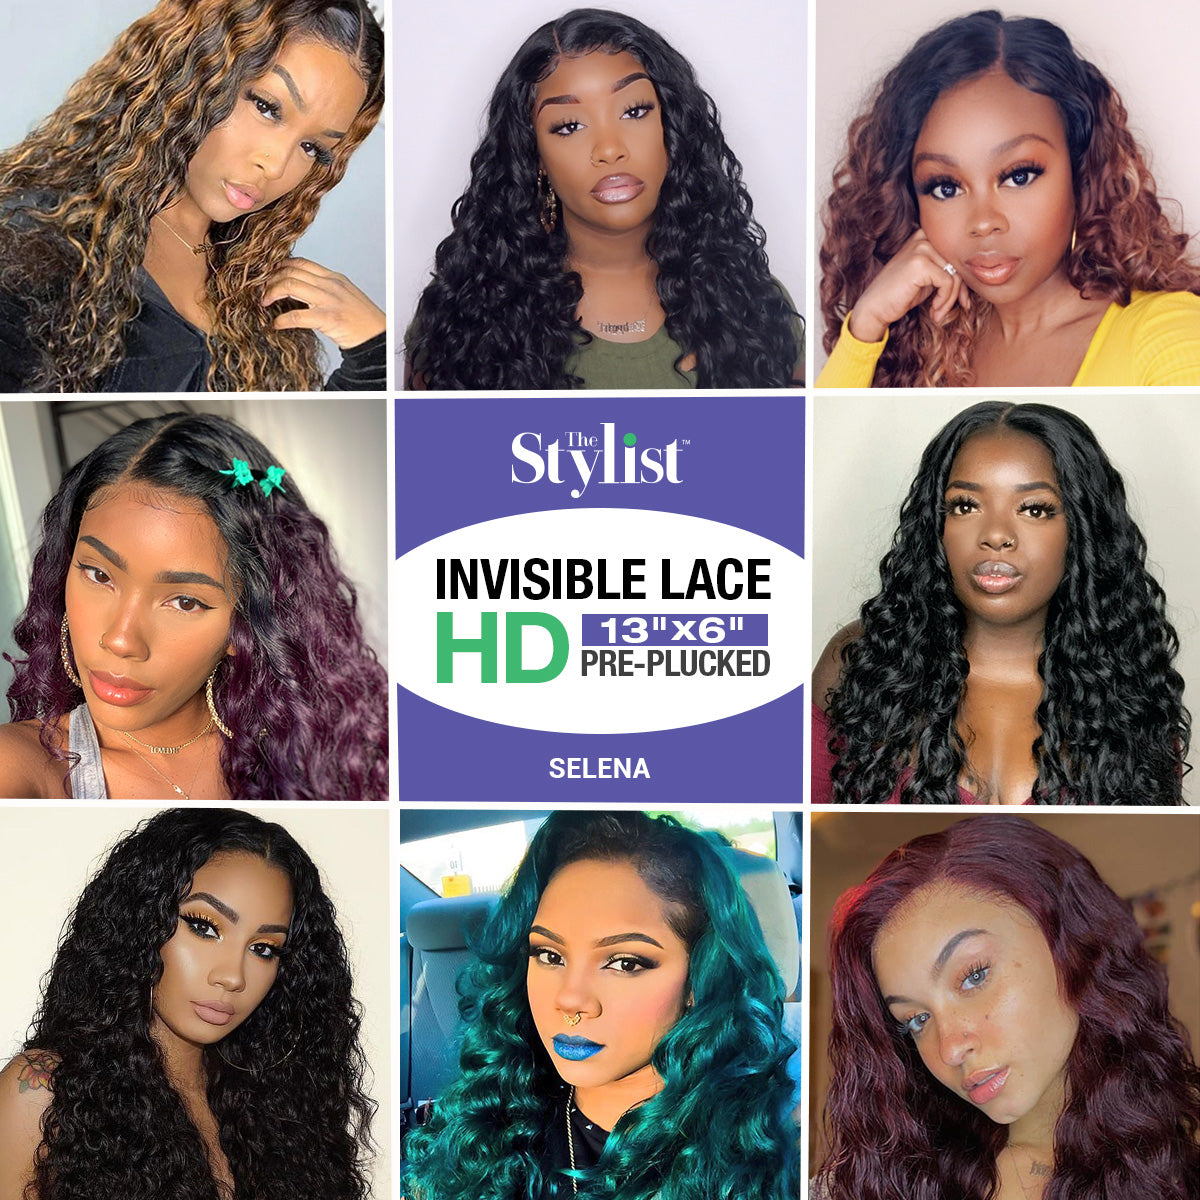 Multi-Parting, 13X6, Human Hair Blend, Frontal Wig, Invisible Lace, Pre-Plucked, Curly Wig, Rodded Curls, Ringlet Curl Pattern, Layered Curly Wig, Volume Wigs,